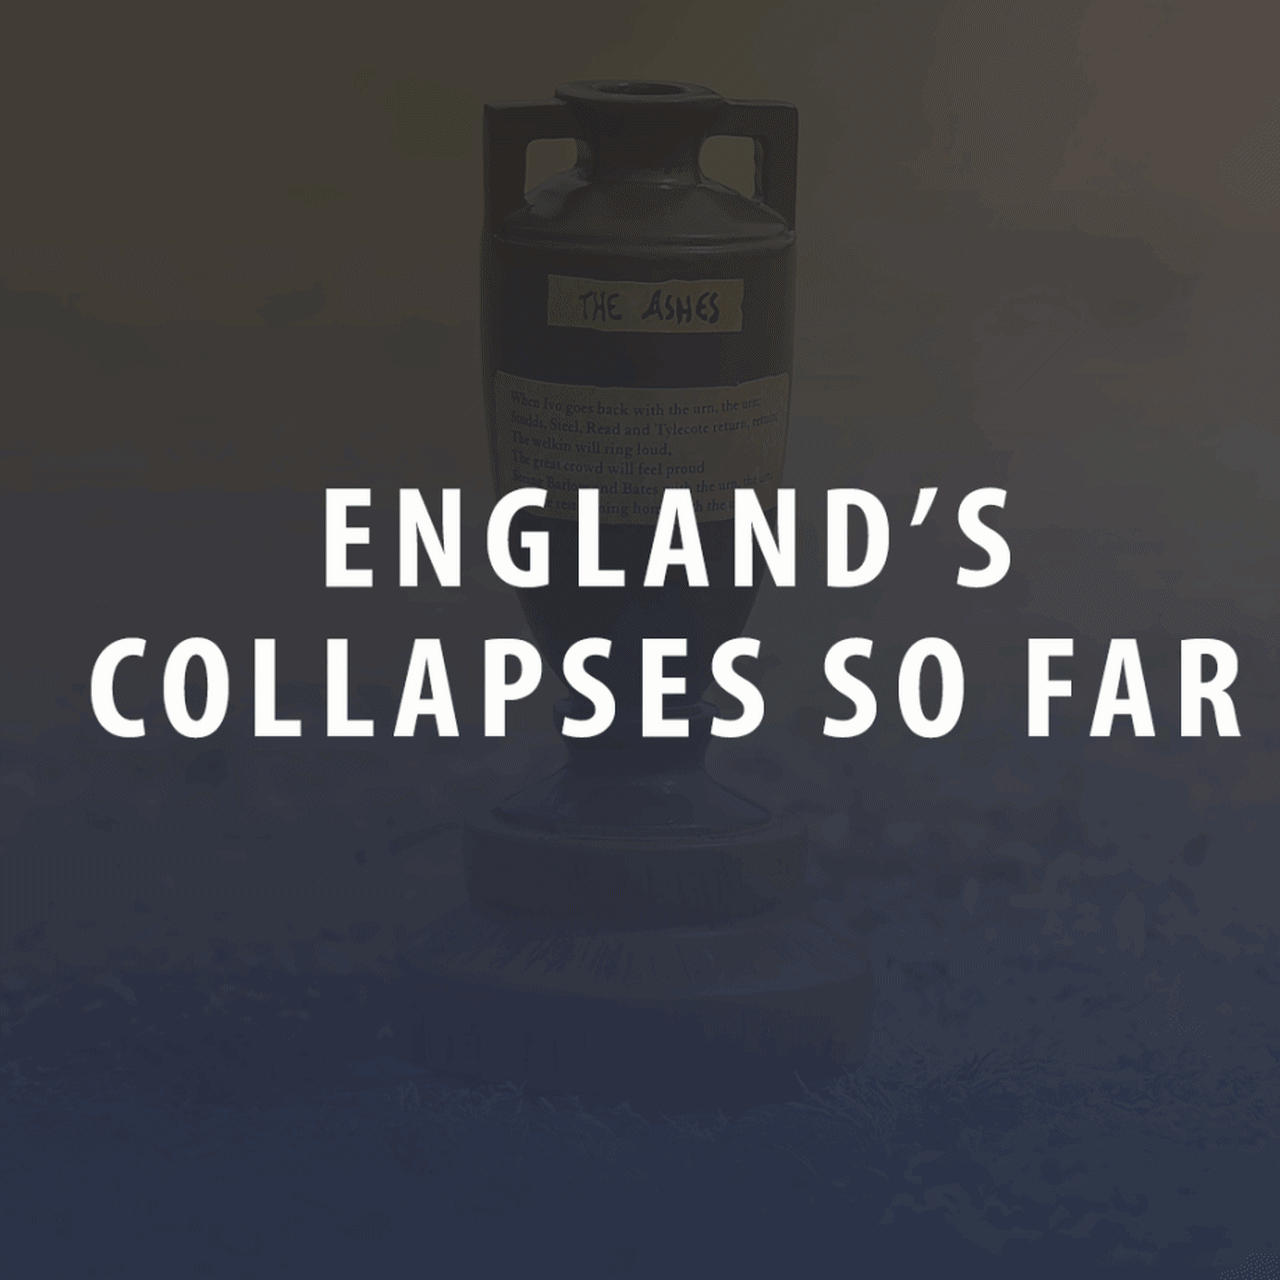 In 11 innings on tour so far, England have suffered a batting collapse in seven of them